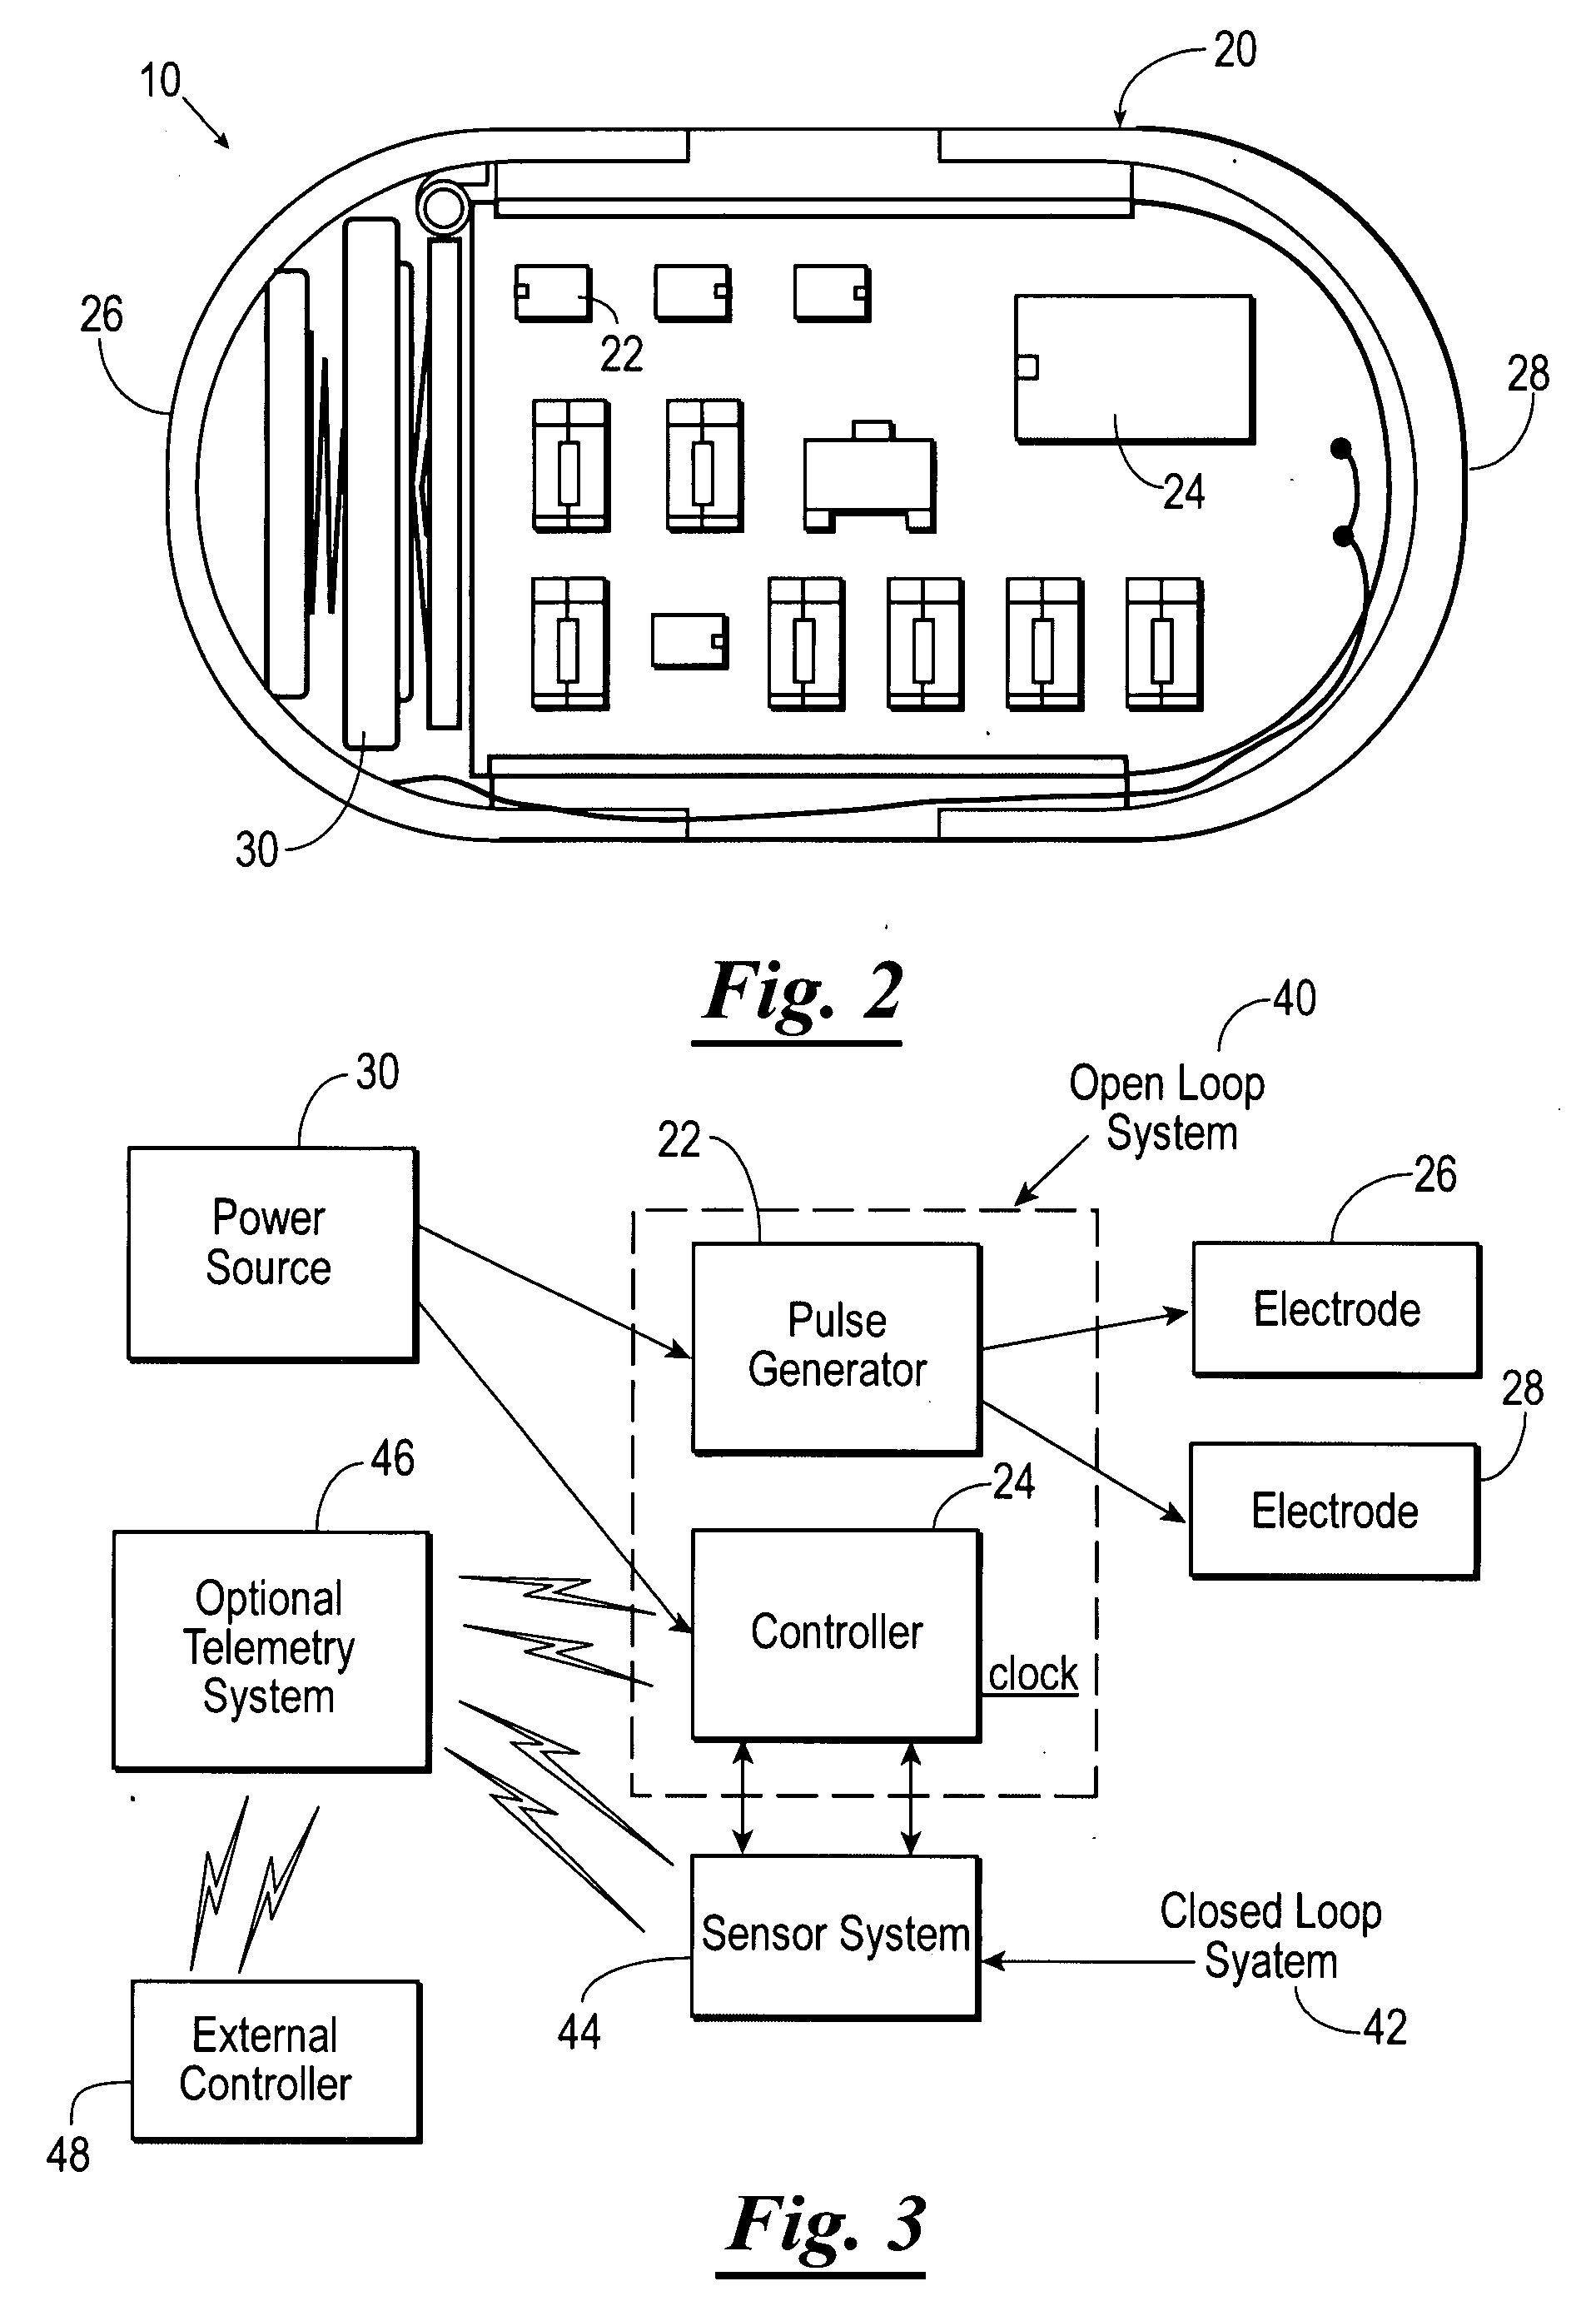 Gastrointestinal stimulator device for digestive and eating disorders